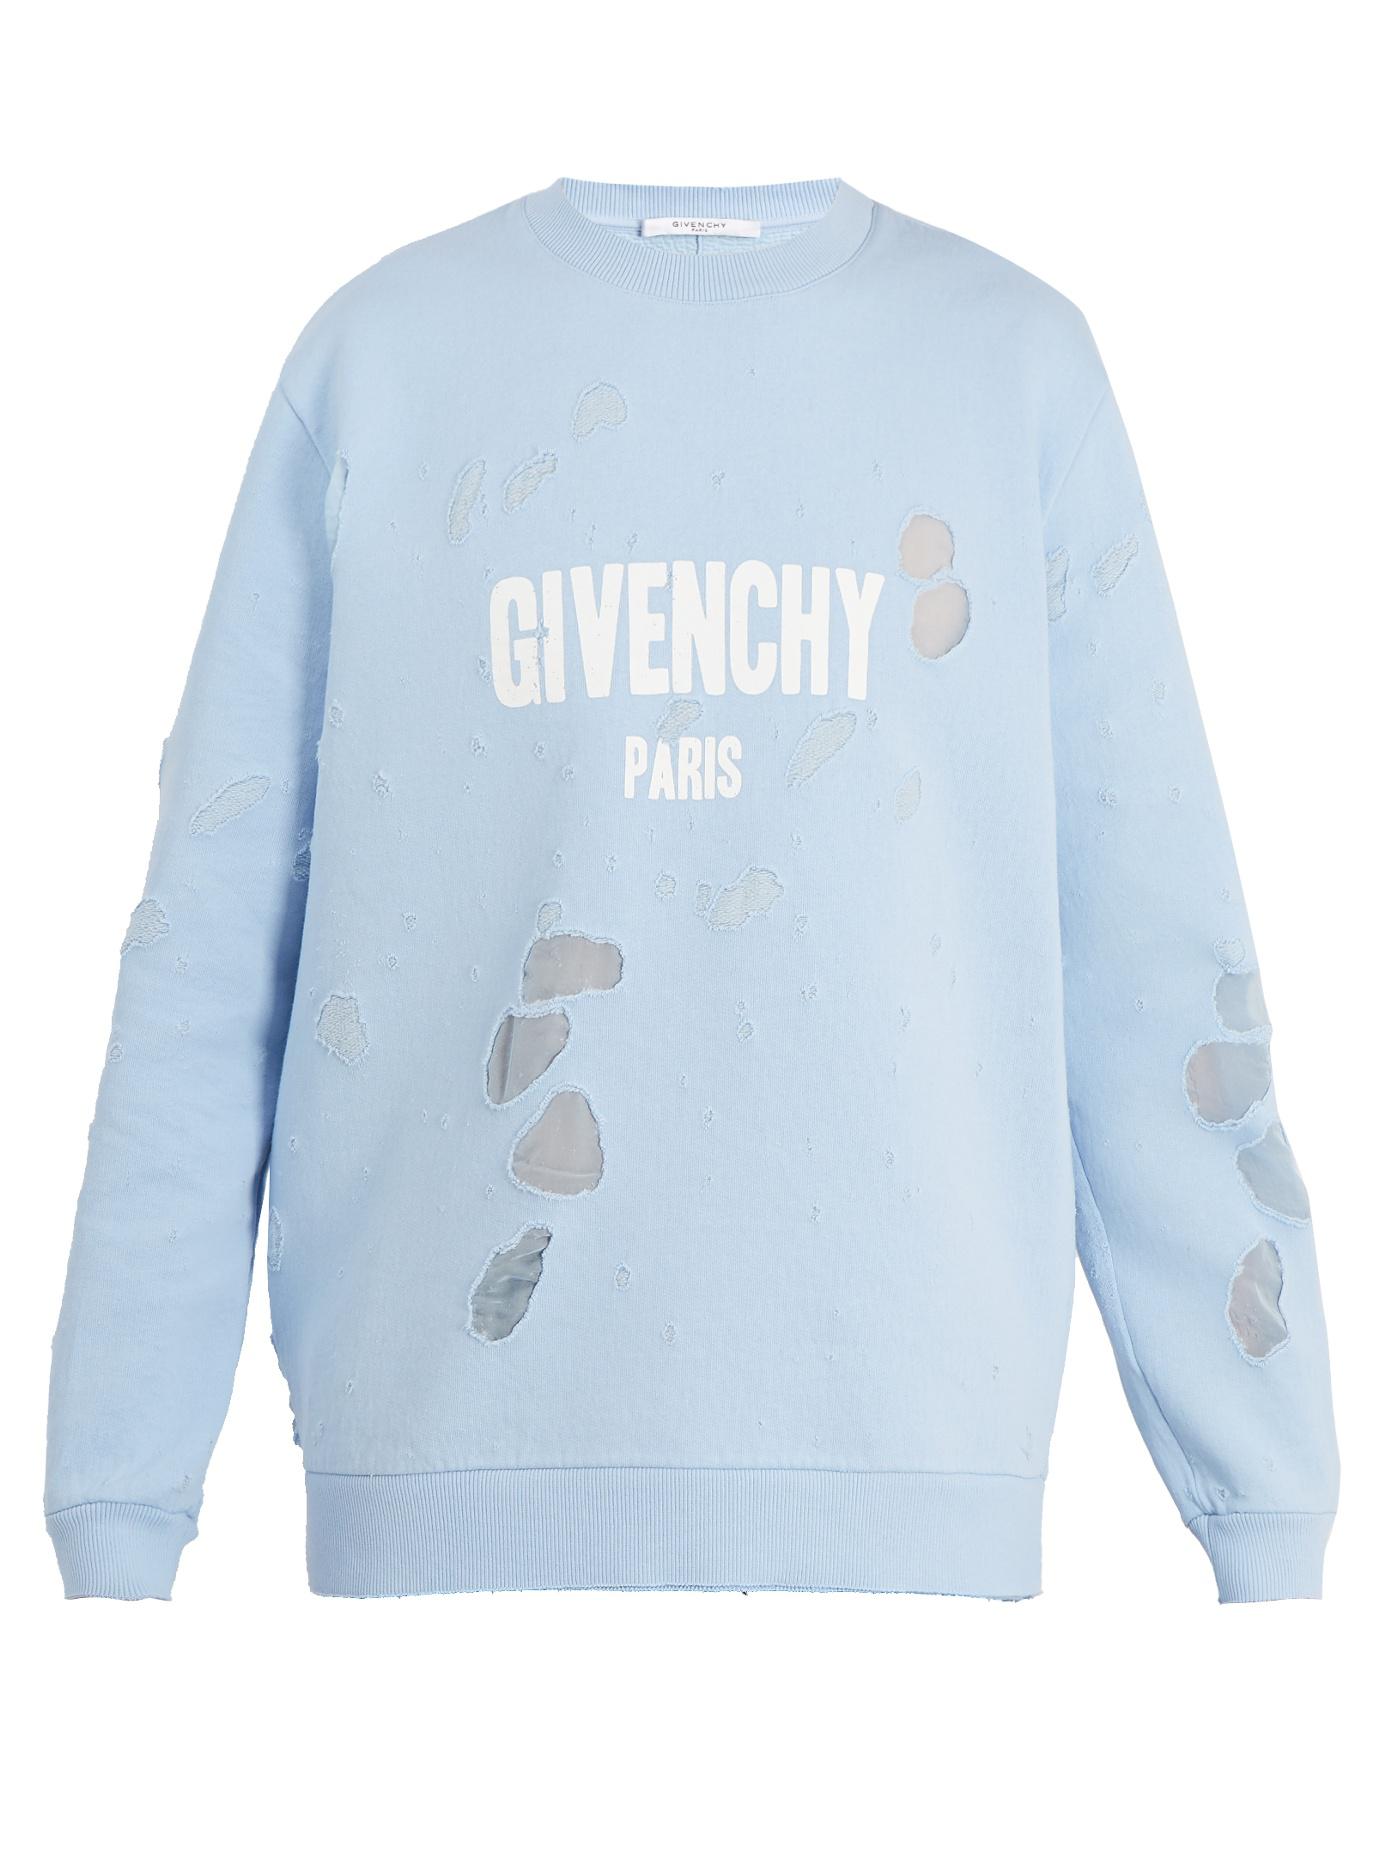 givenchy sweater destroyed